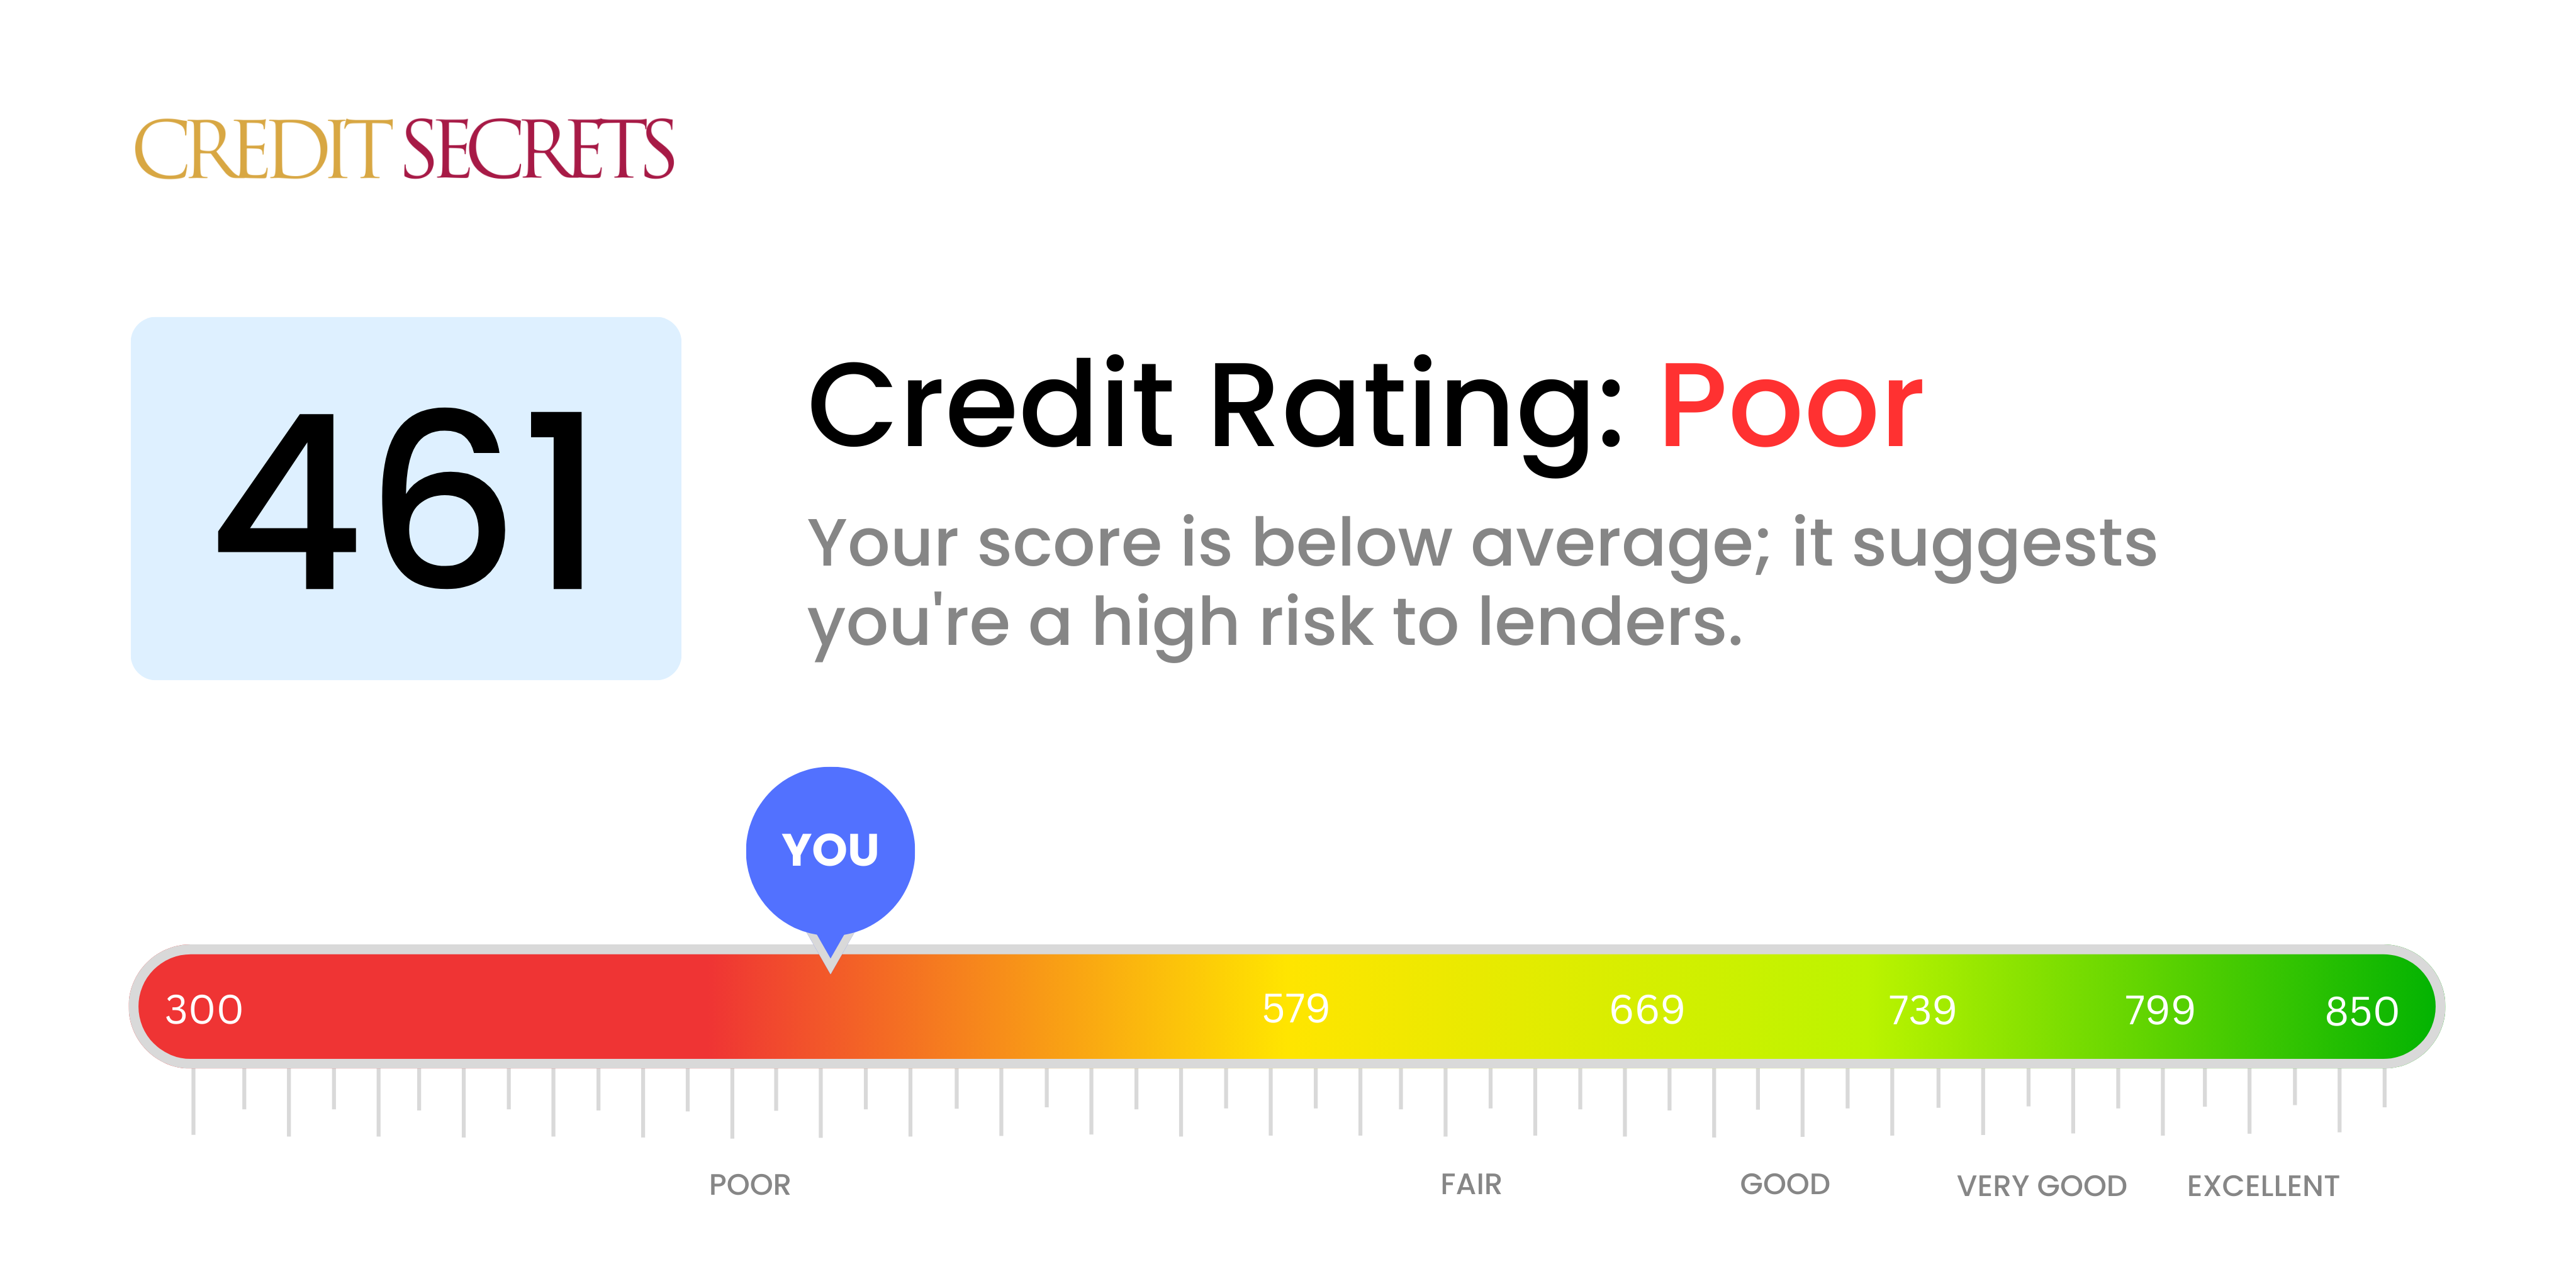 Is 461 a good credit score?